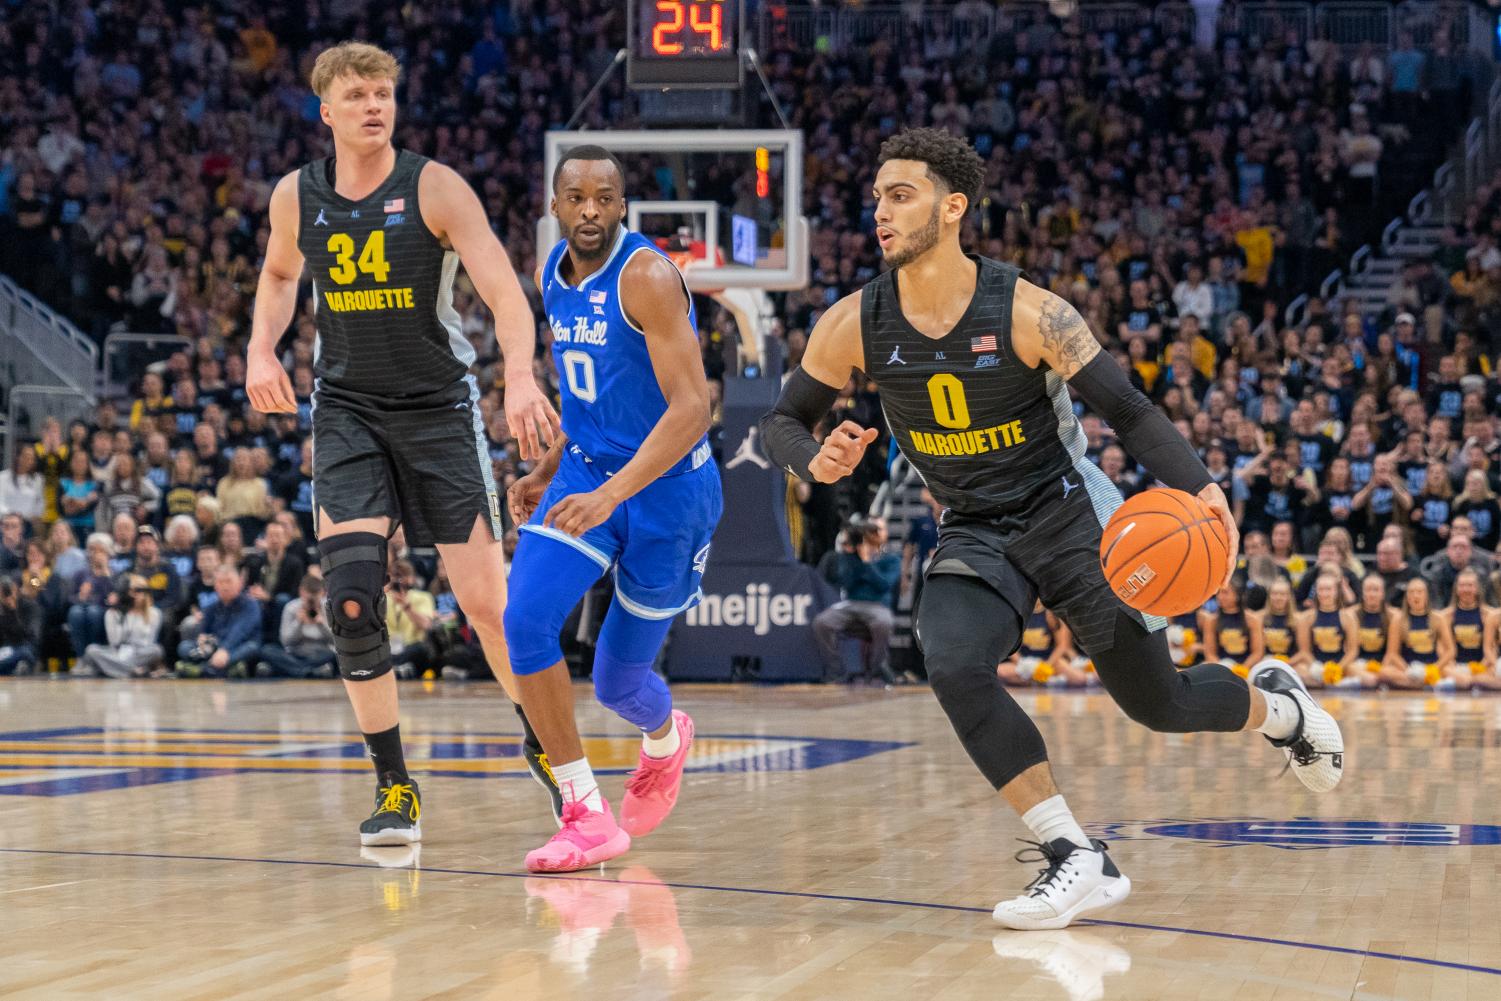 Images from Marquette's 88-79 loss to Seton Hall